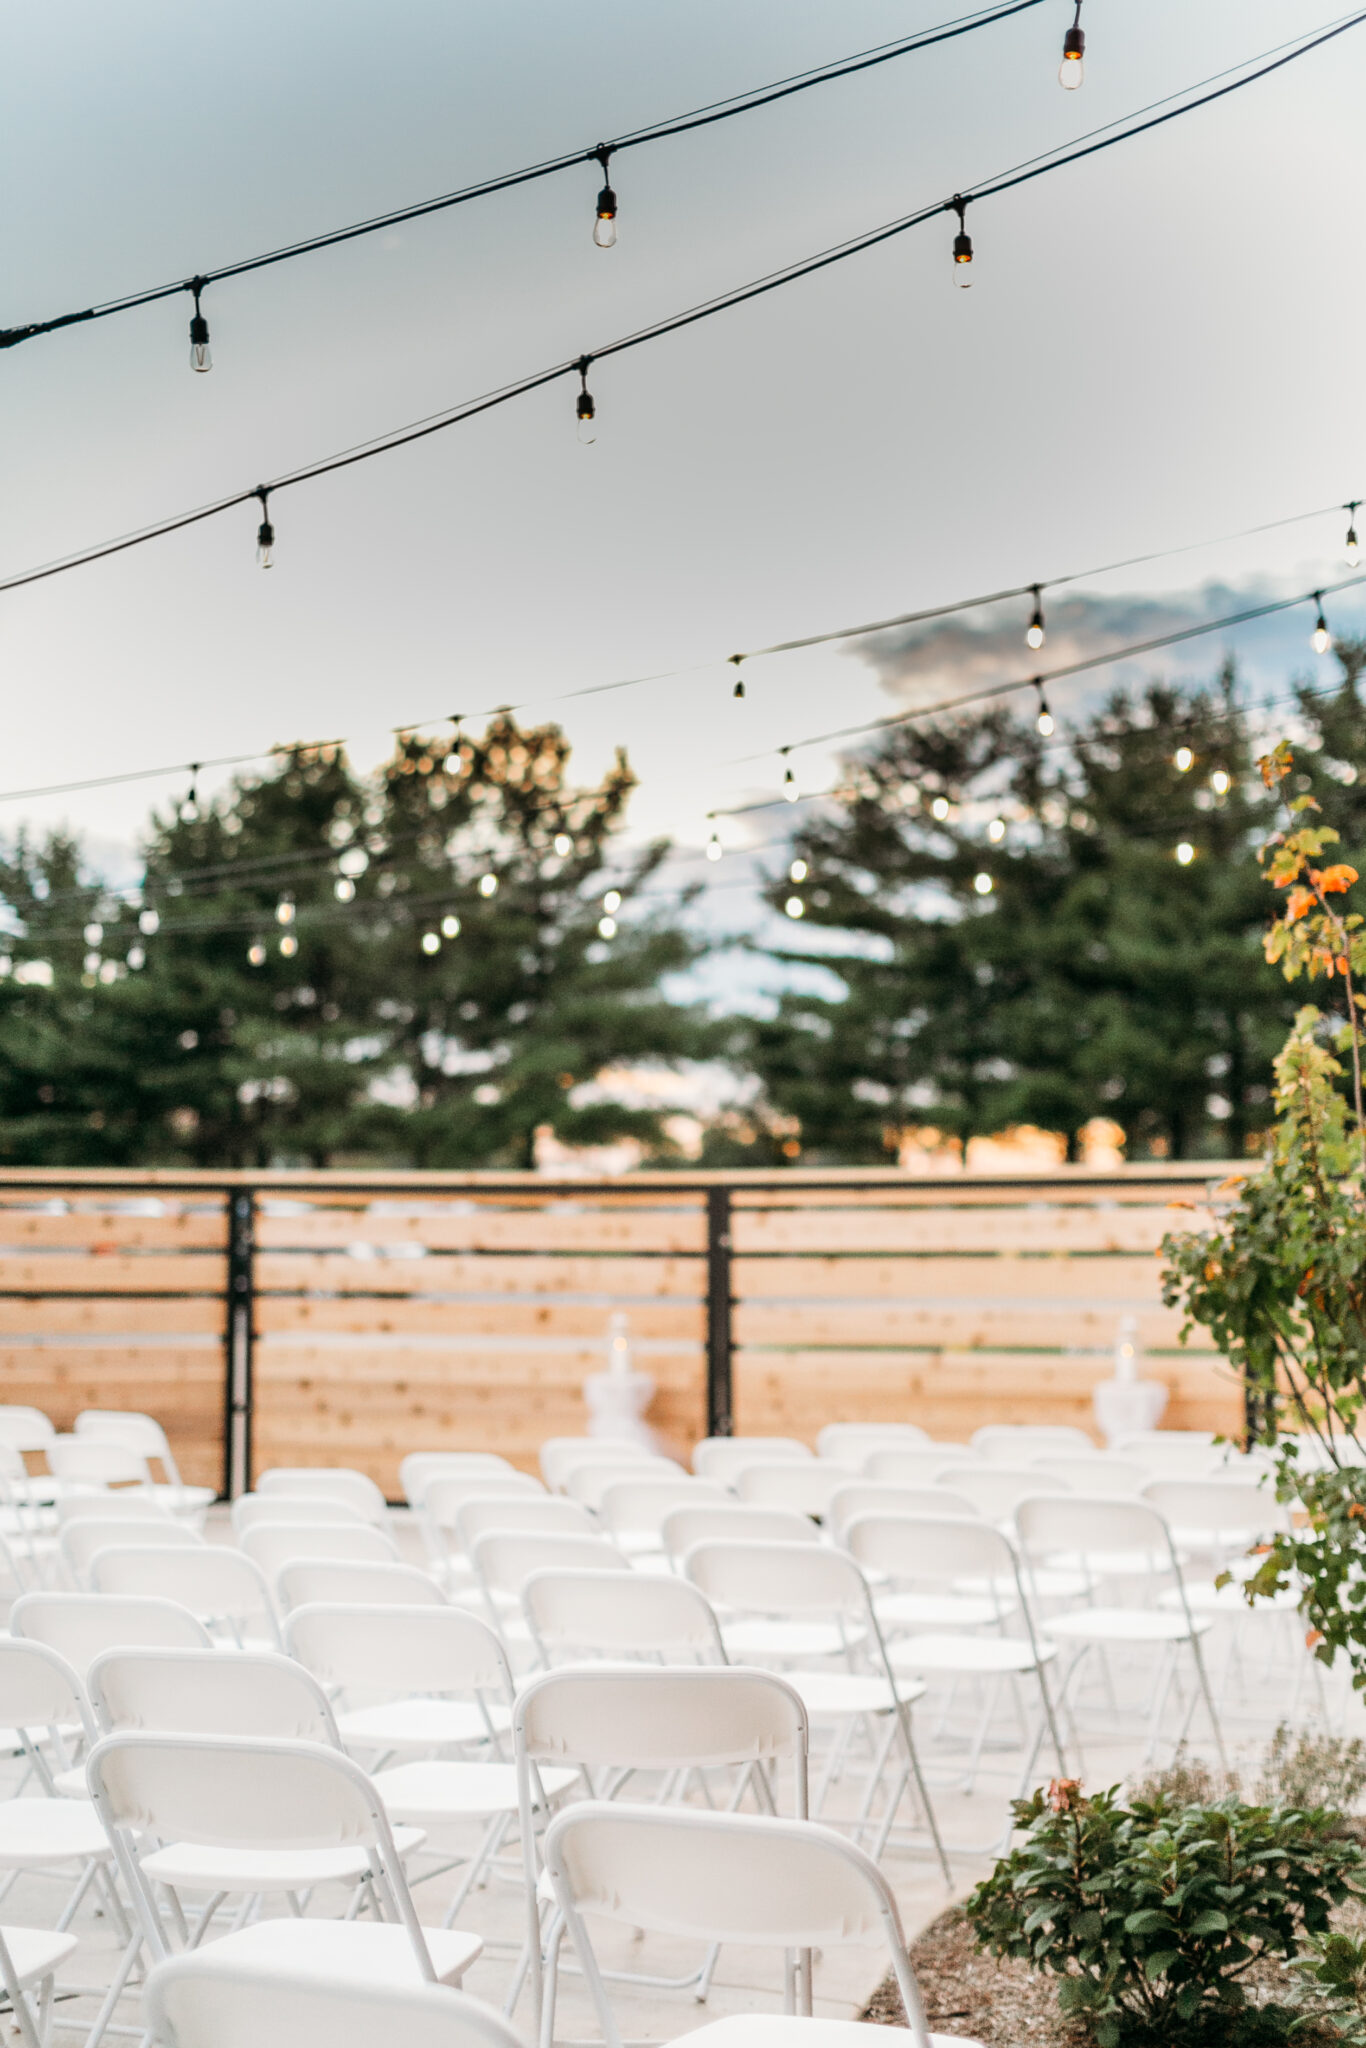 Lights set up for an outdoor space with white foldable chairs littered around the place